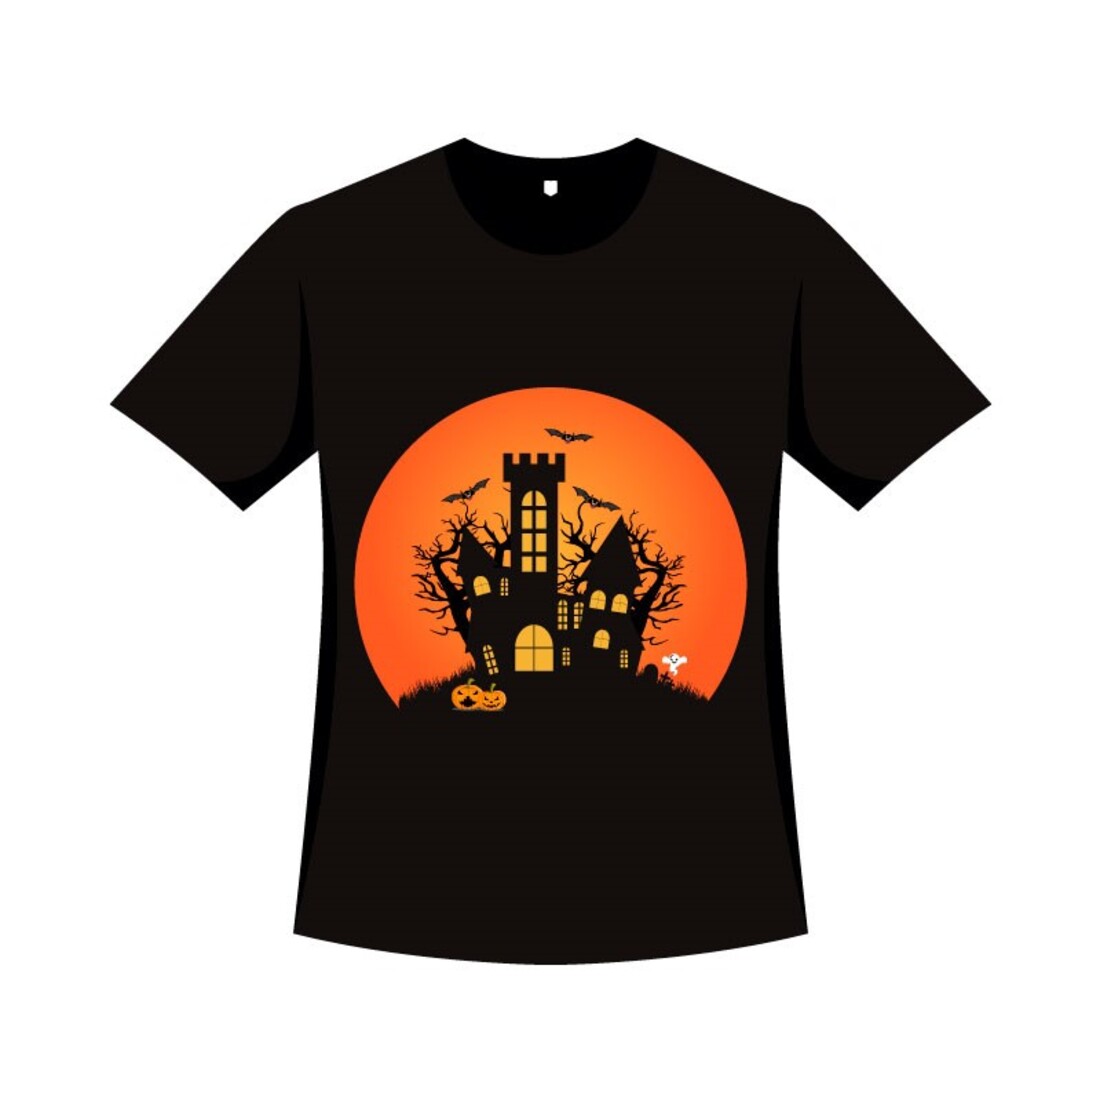 T-shirt Design for Halloween Events cover image.